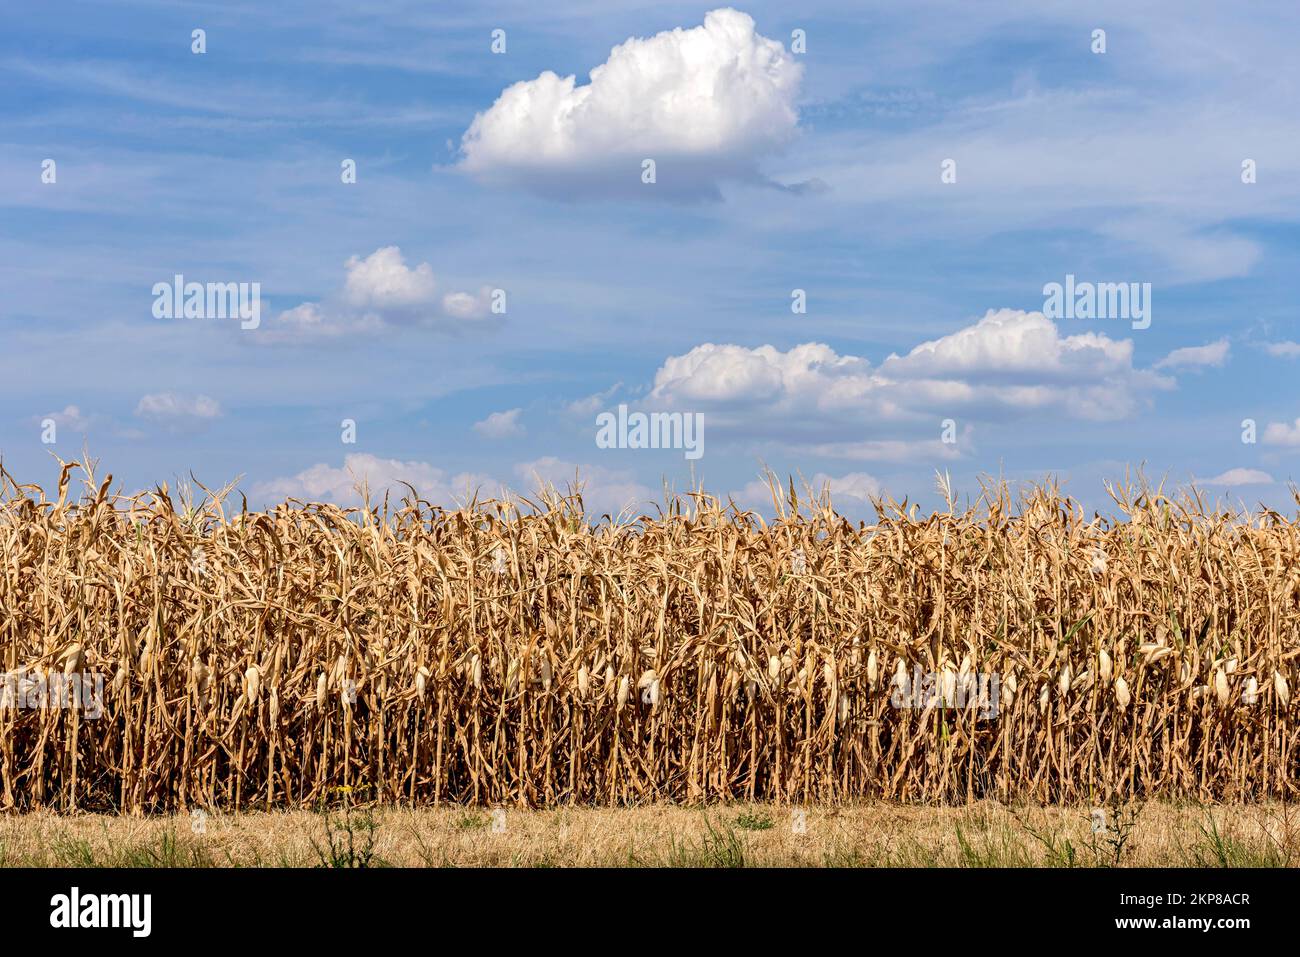 Corn, maize (Zea mays) field, dried out, withered, crop damage, heat, drought, water shortage, climate change, Hesse, Germany, Europe Stock Photo